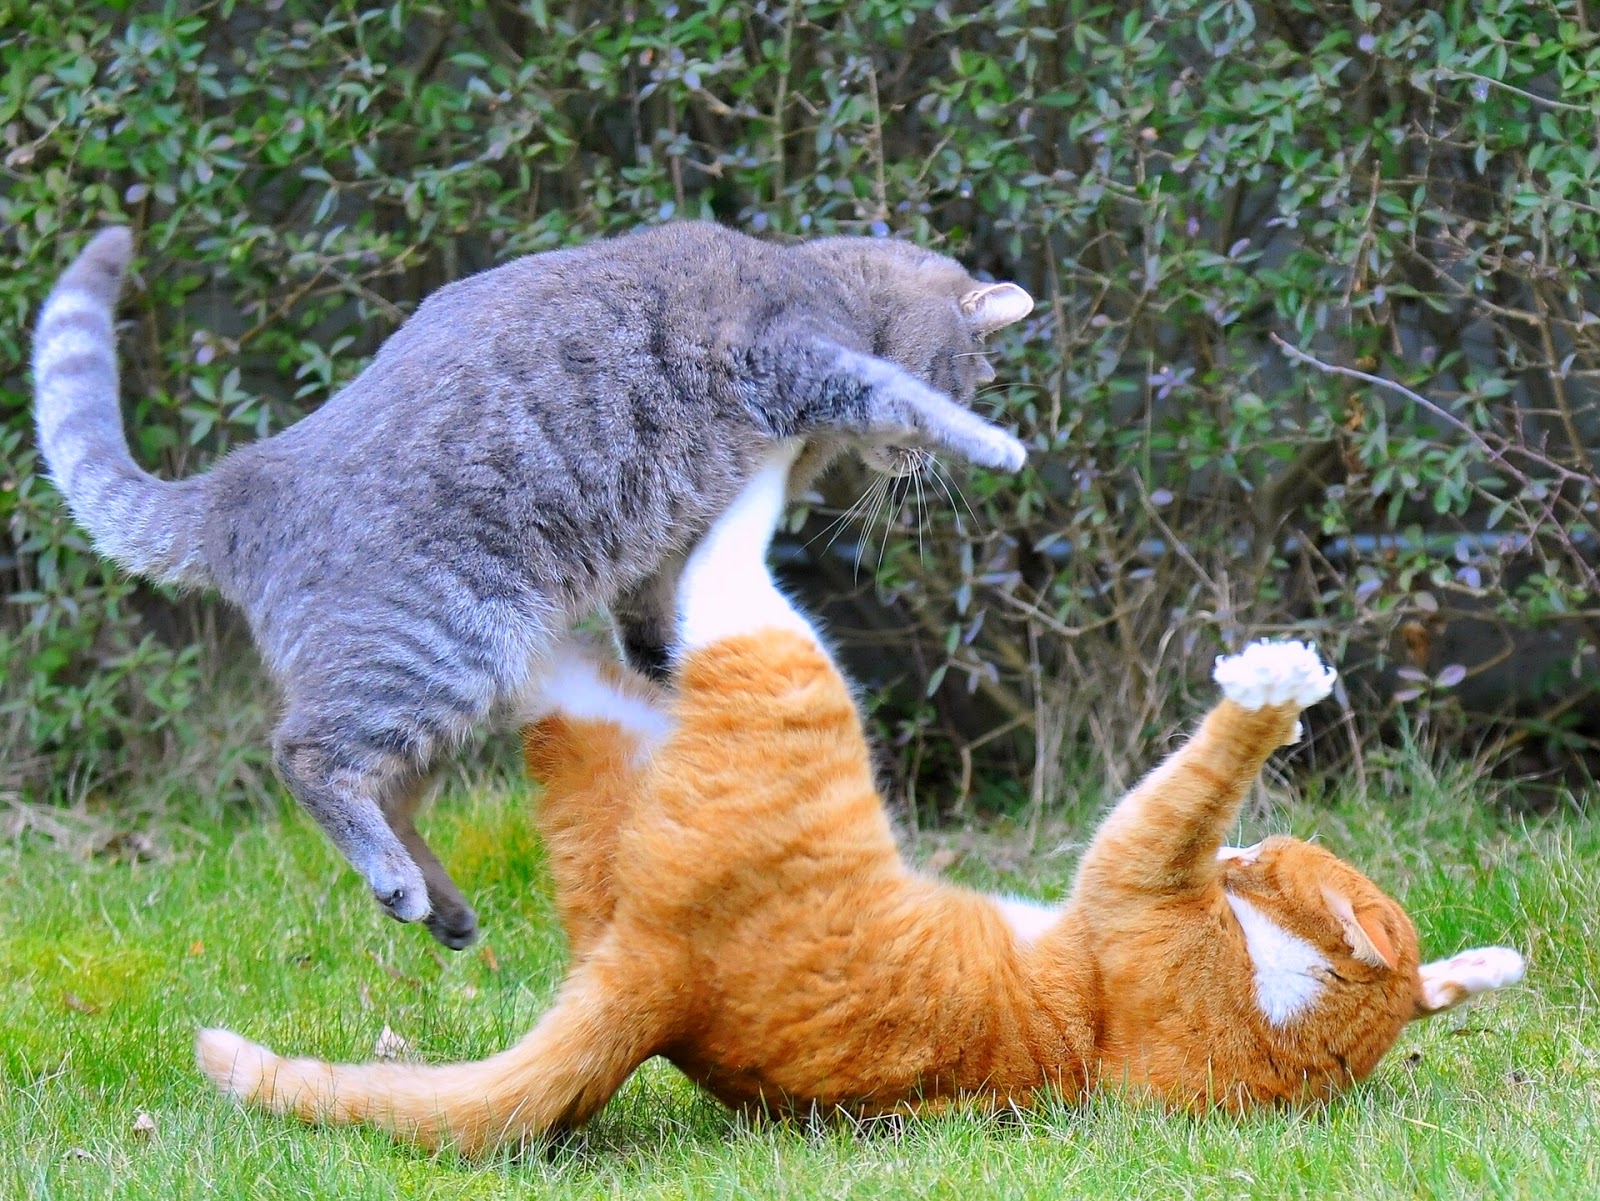 37 HQ Pictures Dreaming Of Cats Fighting : How to Stop a Cat Fight and Why They Happen - Catster